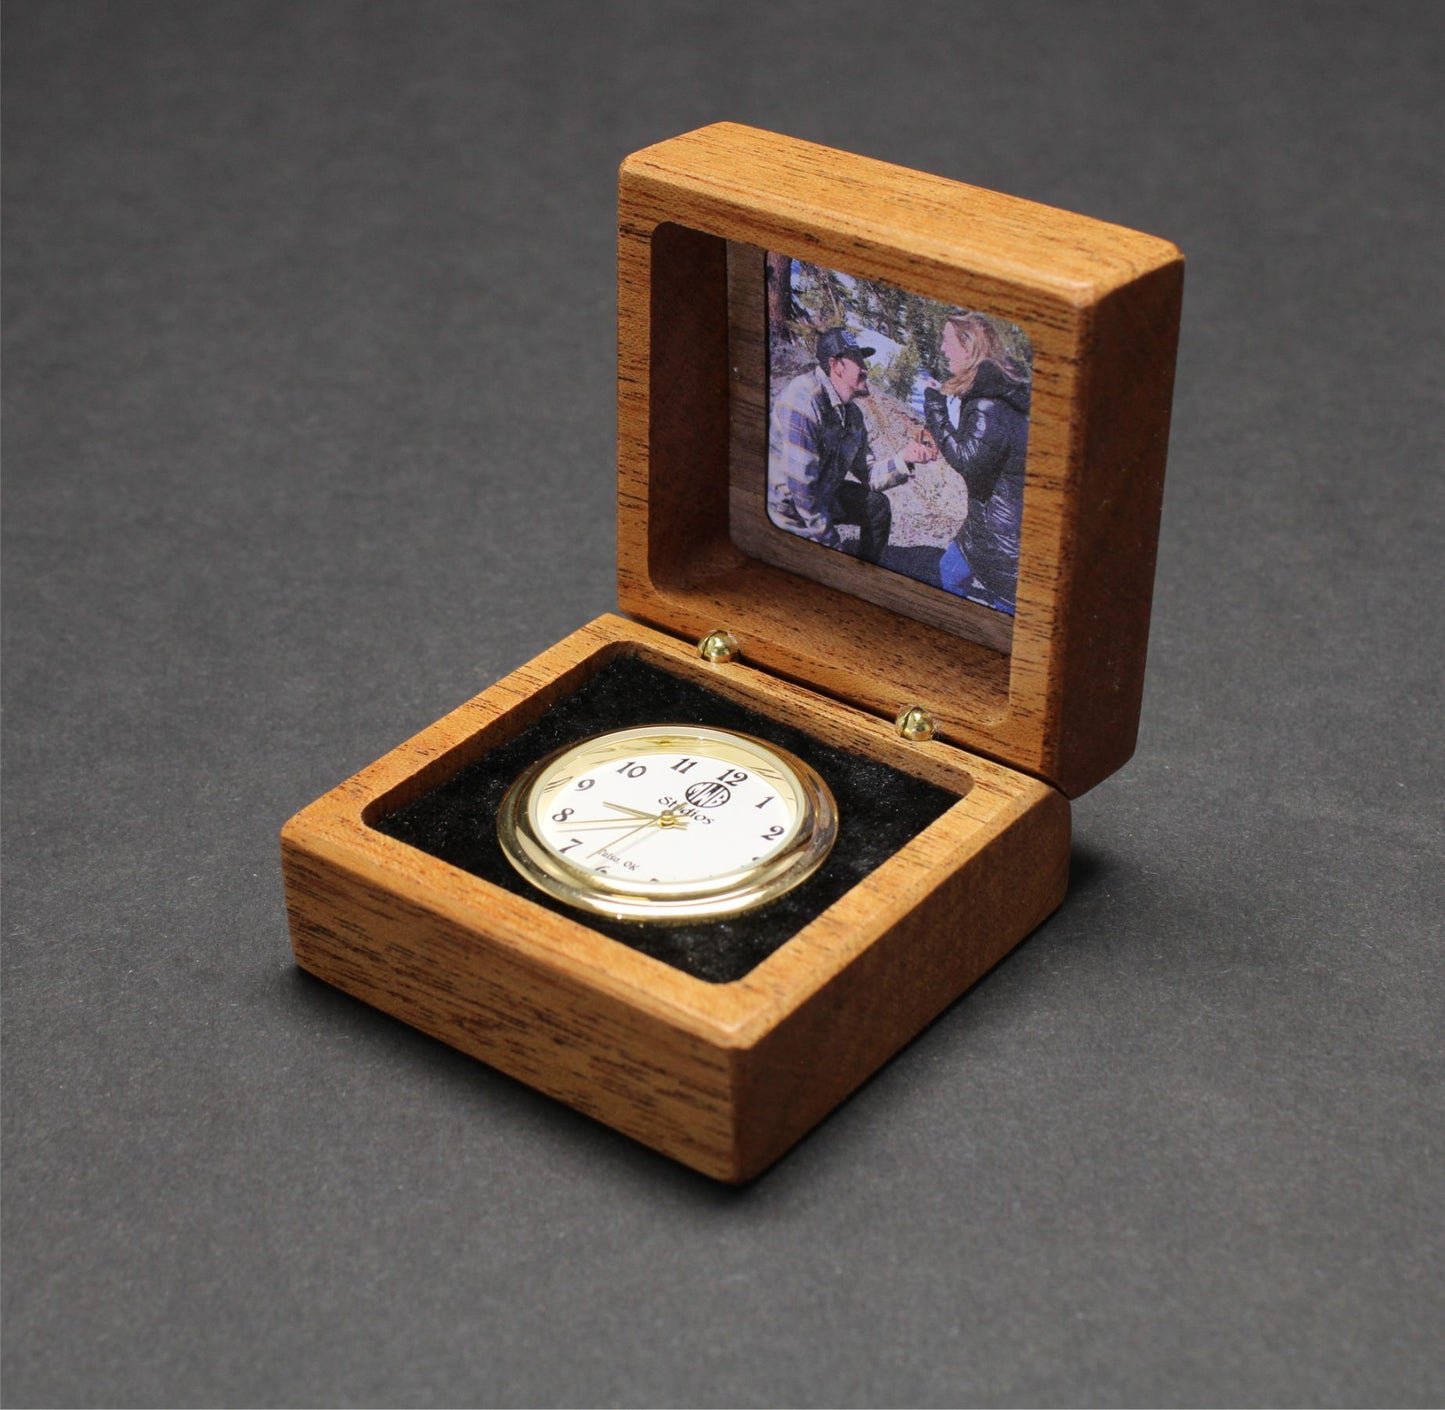 Handcrafted Walnut Ring Box - "Art Deco"  RB-4   Made in the U.S.